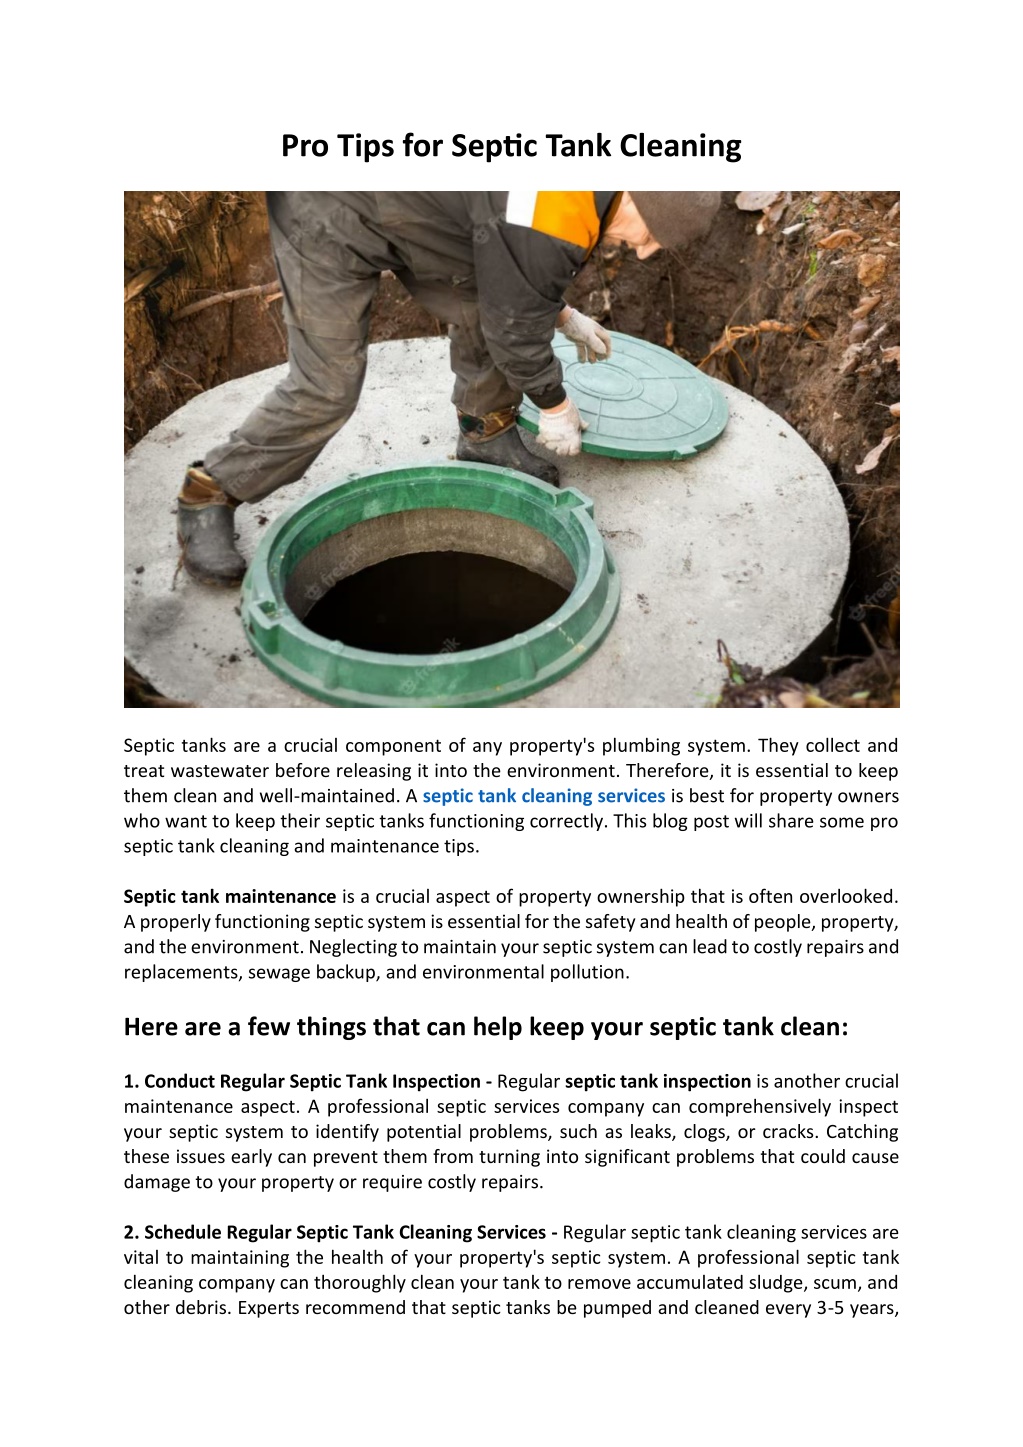 Signs Your Septic Pump Needs Maintenance - Professional inspection and maintenance tips